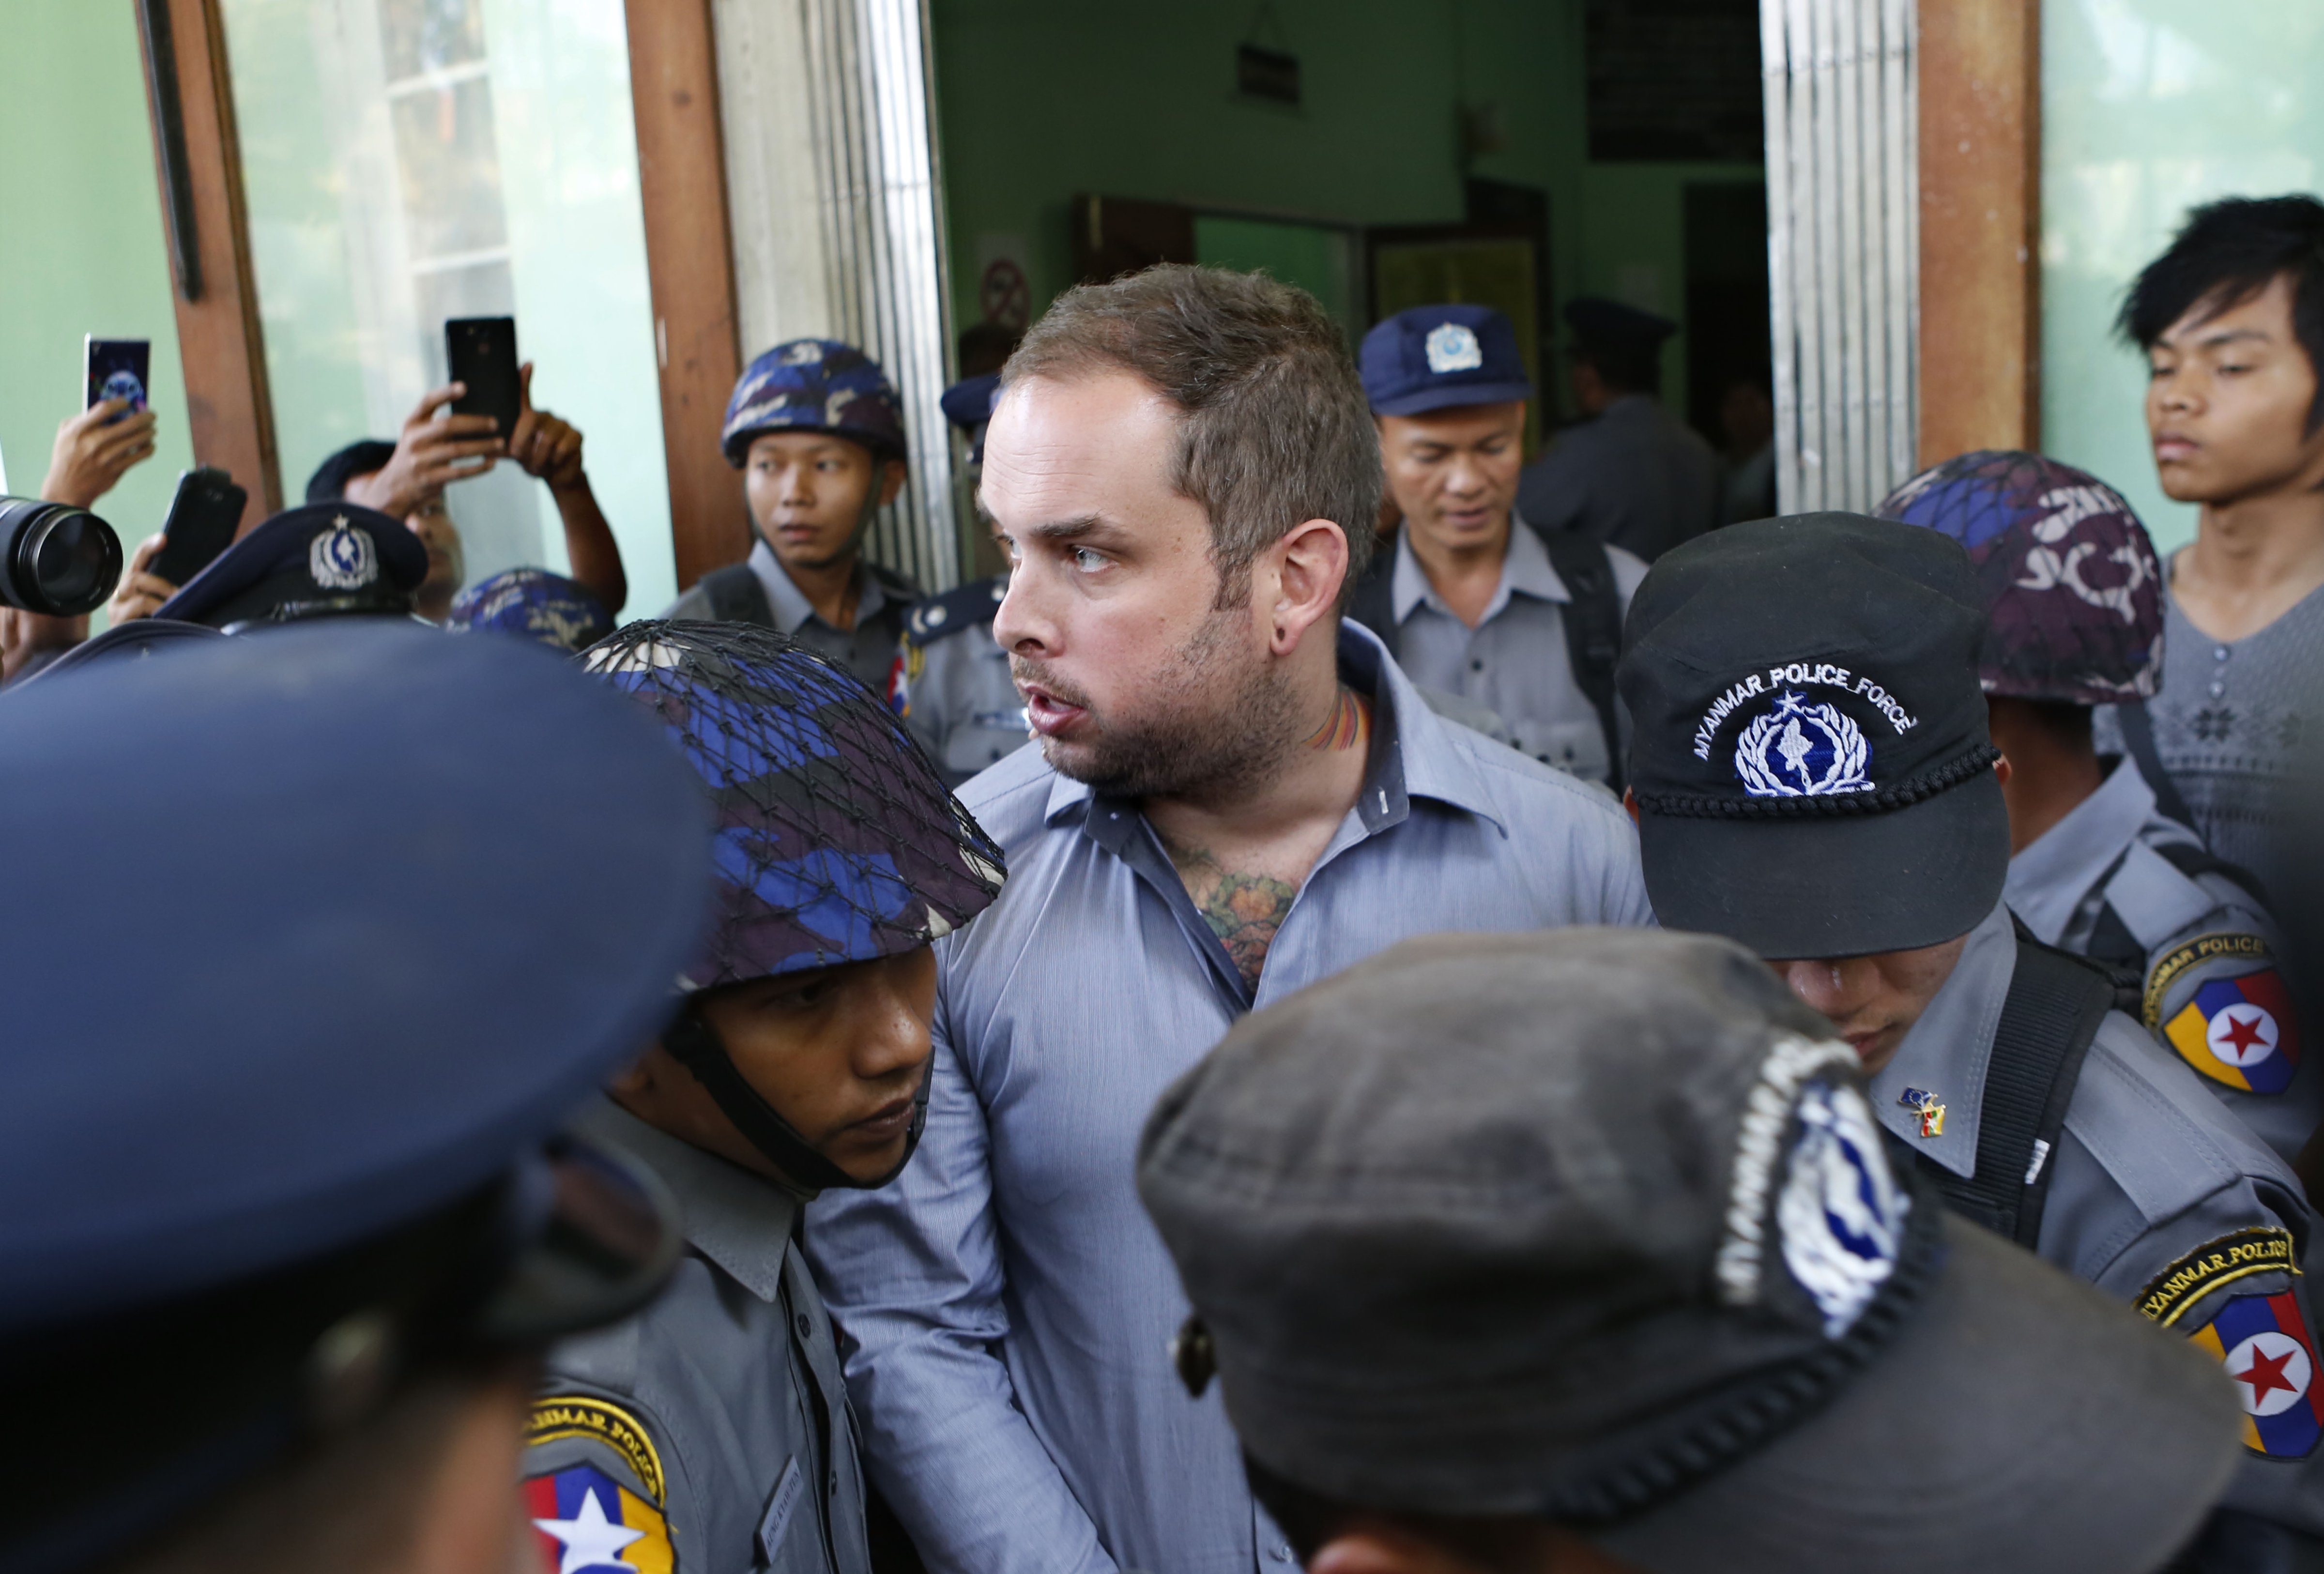 New Zealand citizen Philip Blackwood, center, is escorted by Burmese policemen after his hearing at a court in Rangoon on Dec. 18, 2014 (Lynn Bo Bo—EPA)